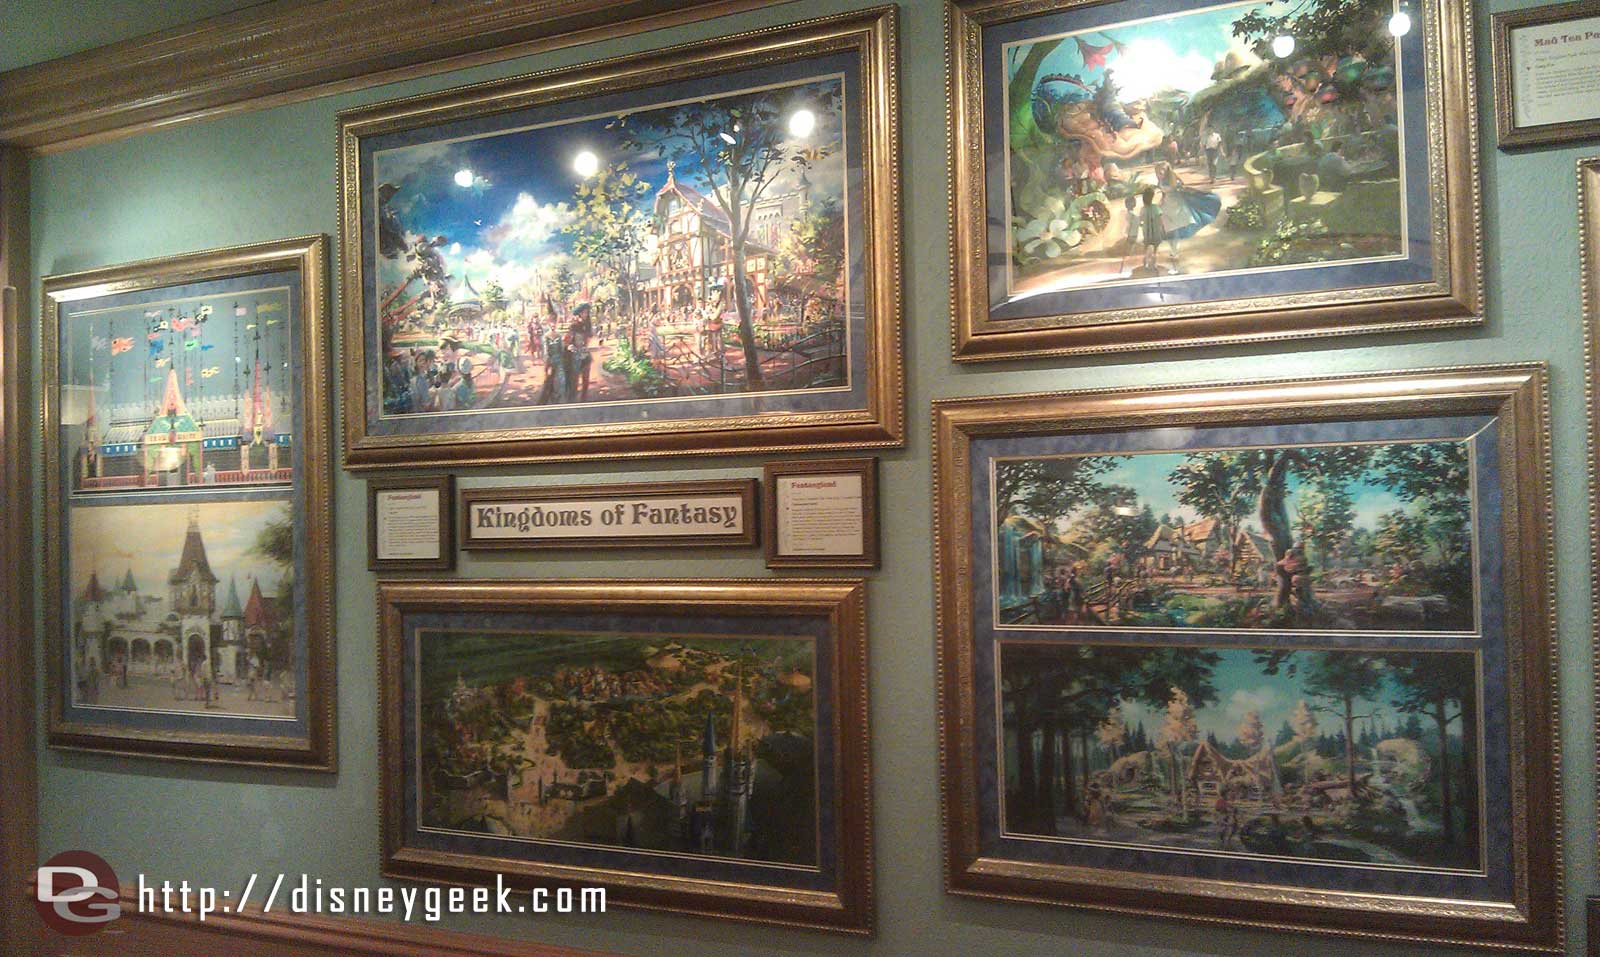 Realms of Fantasy opened at the Disney Gallery on Main Street last week.